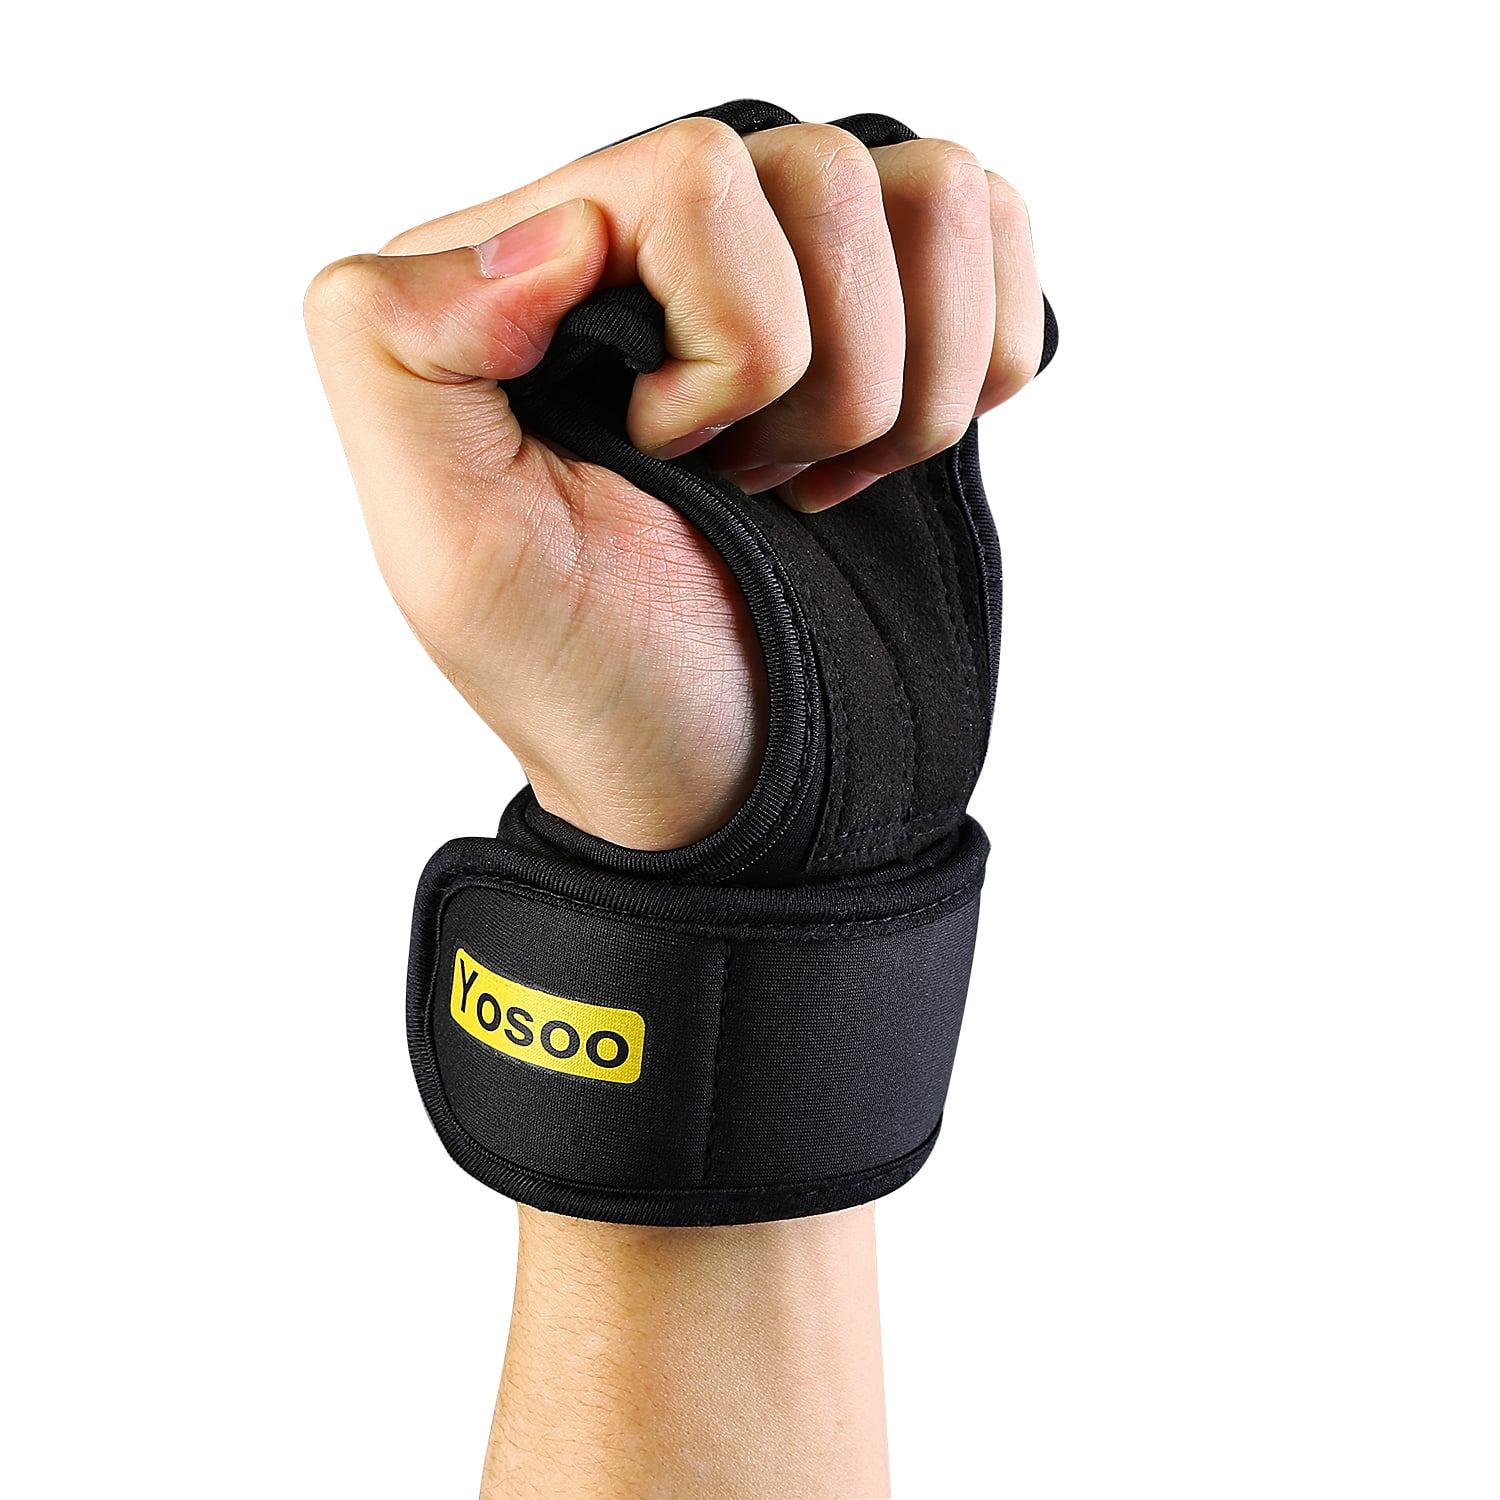 to the Base of the Middle Finger Measure the Right Hand From the Base of the Palm Where Palm Meets the Wrist Where Middle Finger and Palm Meet. ! Gymnastics Hand Grips Youth Sizes Soft Genuine Leather 